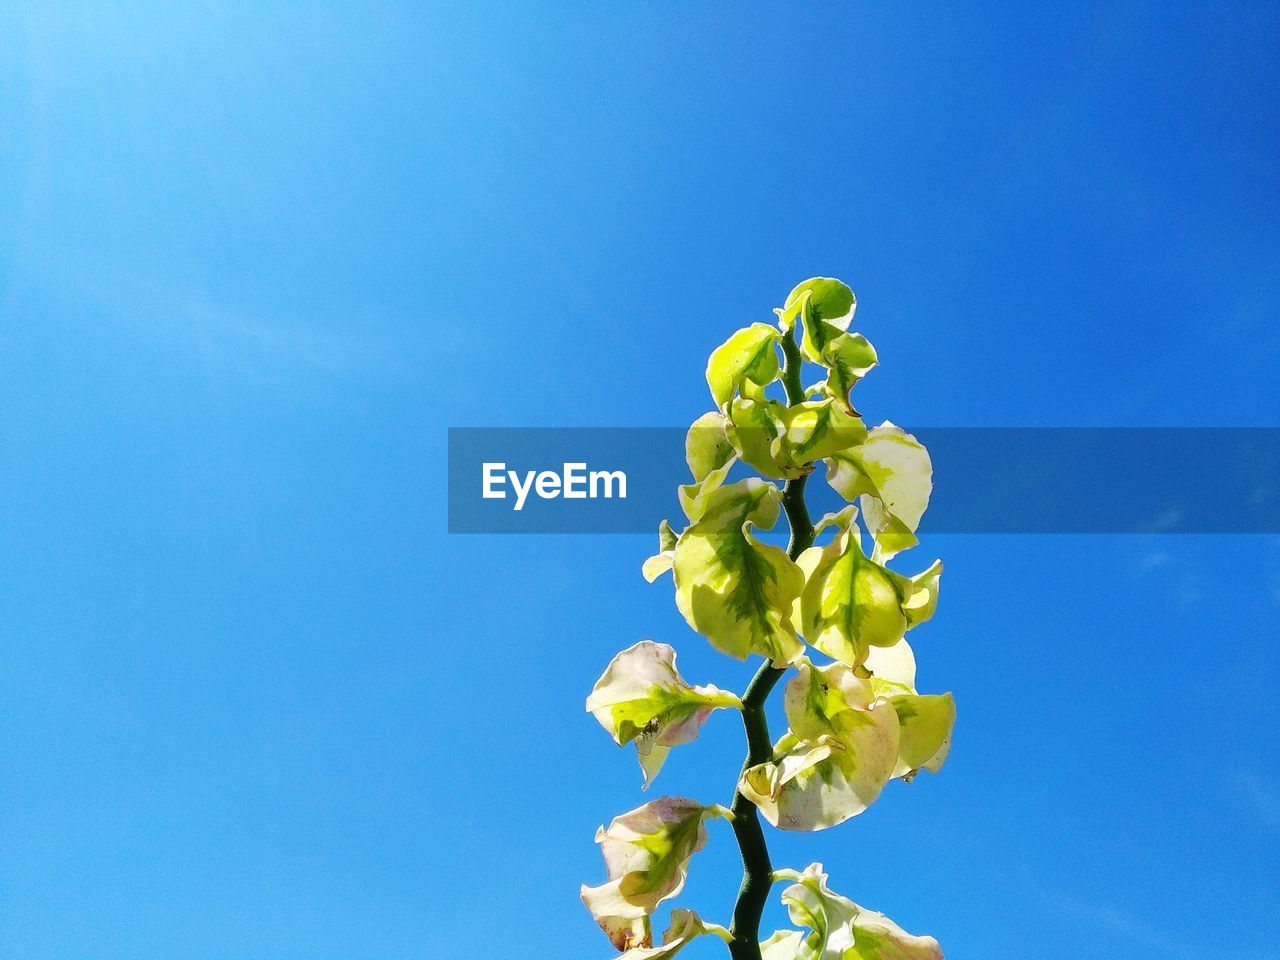 LOW ANGLE VIEW OF PLANT AGAINST BLUE SKY